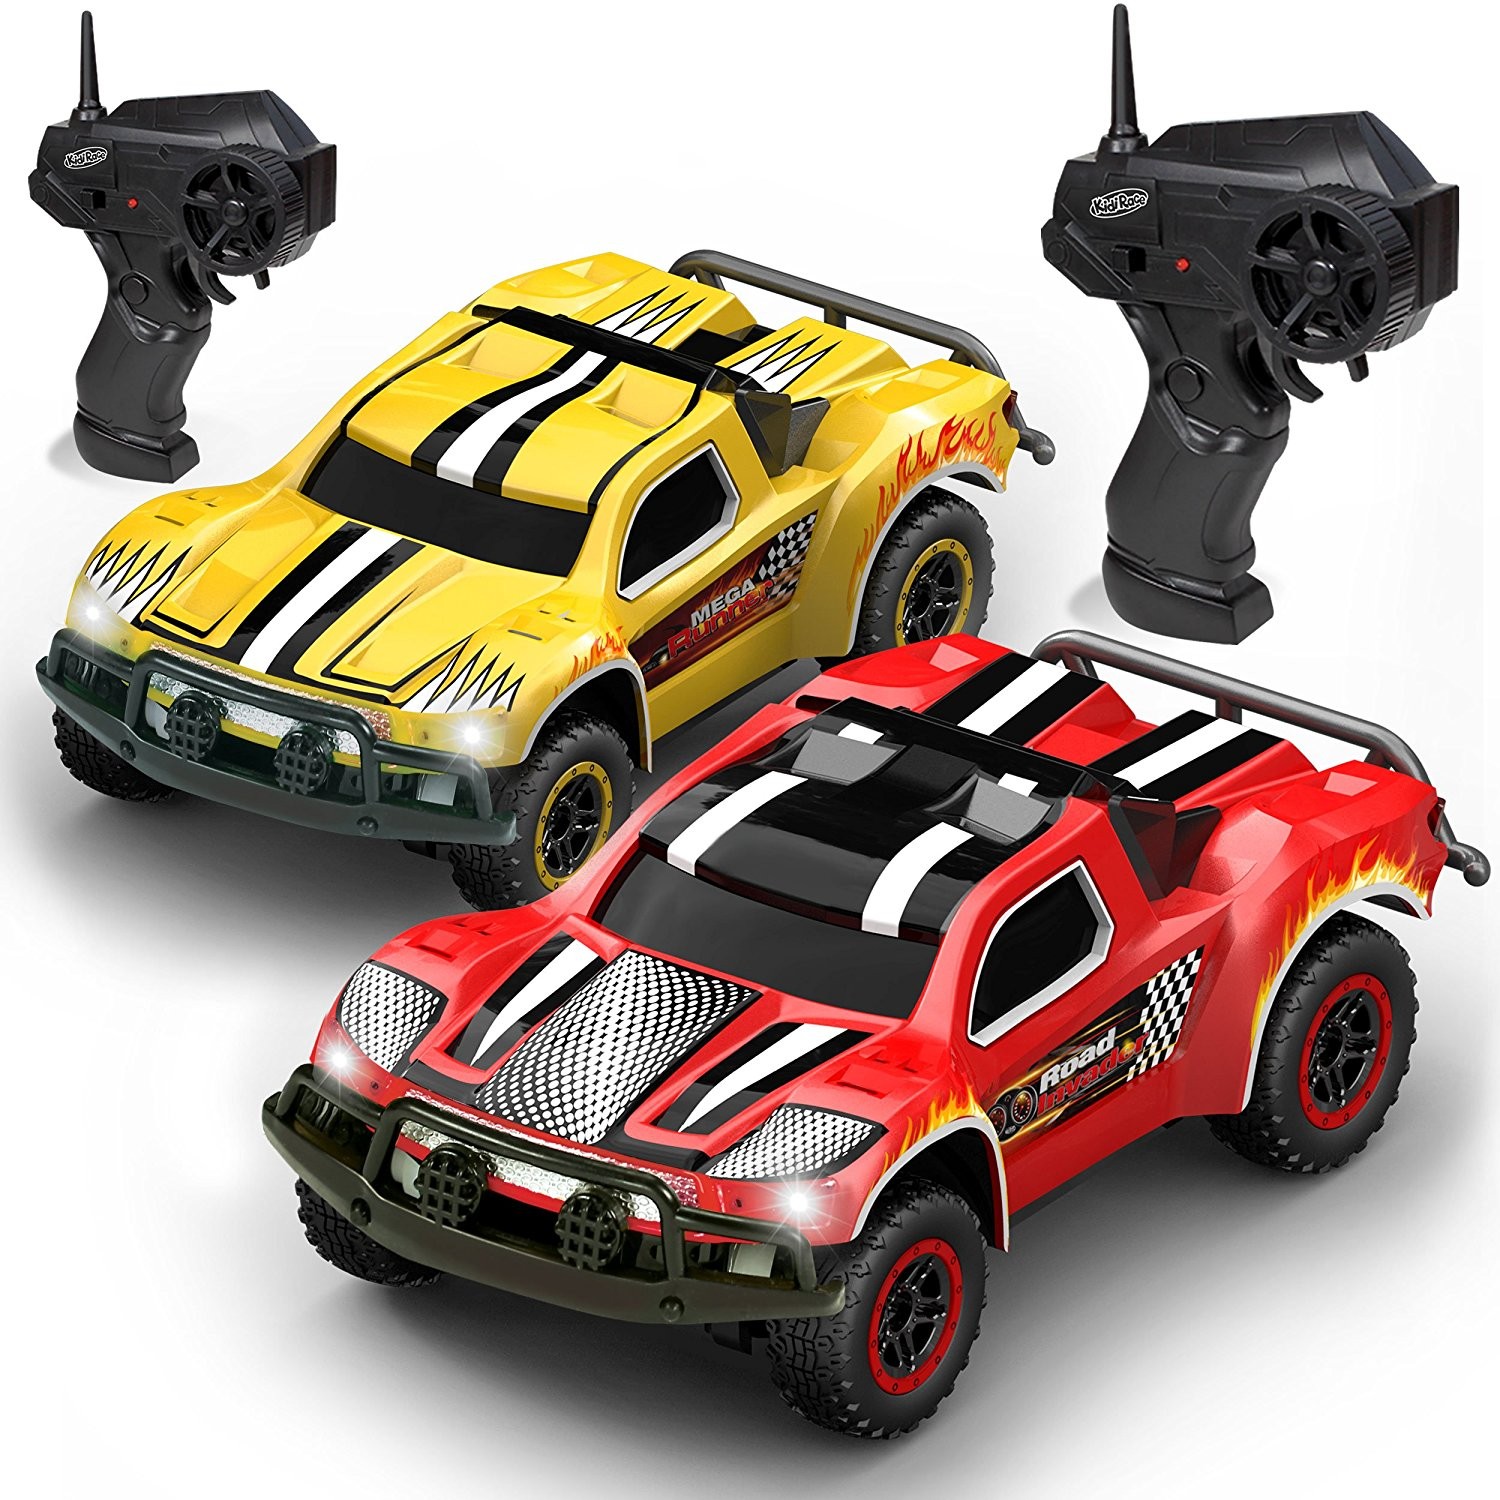 Best Remote Control Car -2 Mini RC Racing Coupe Cars - With Sale ...